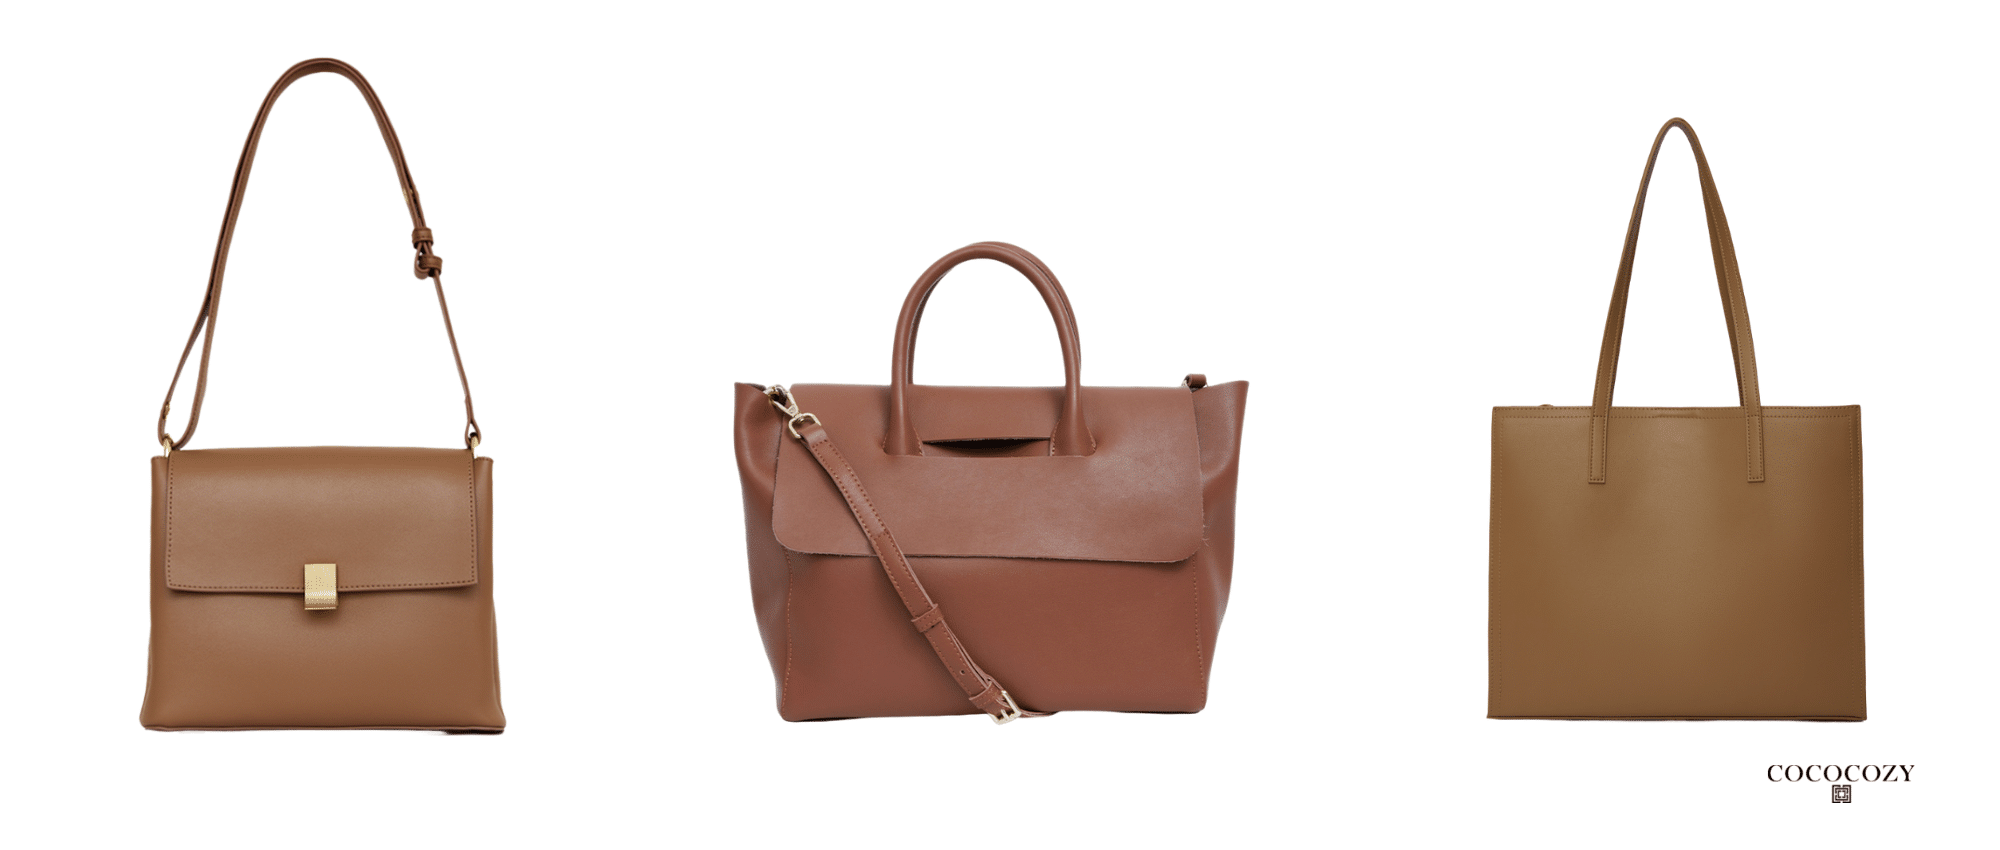 Alt tag for brown-leather-tote-bags-fall-handbags-top-handle-vogue-cococozy